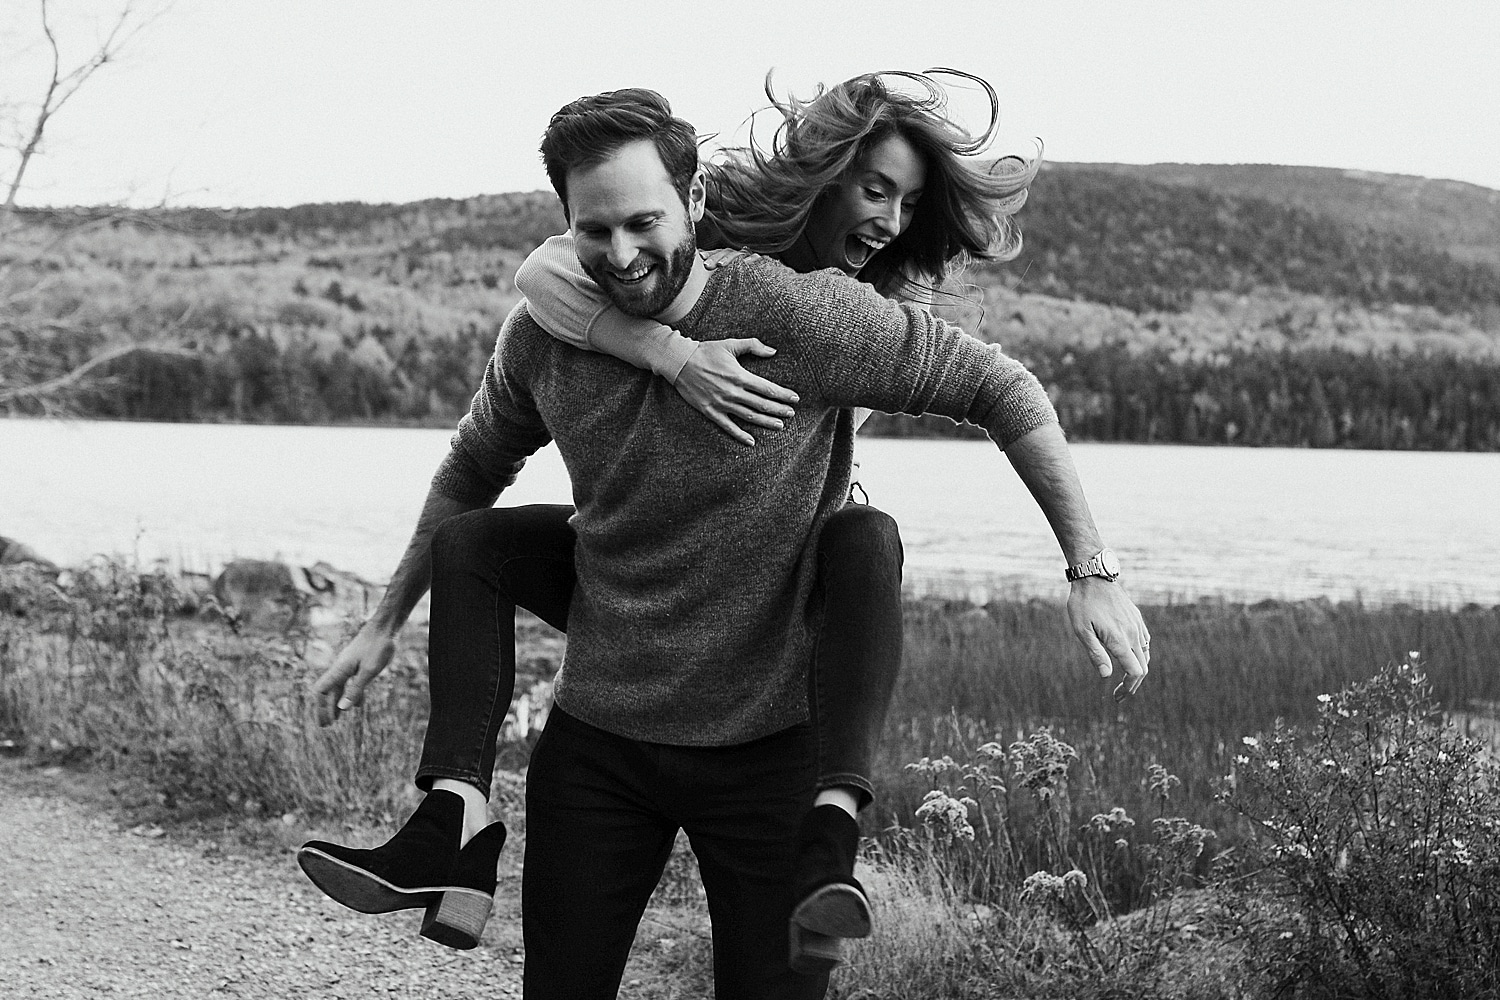 woman jumping on man's back for piggyback